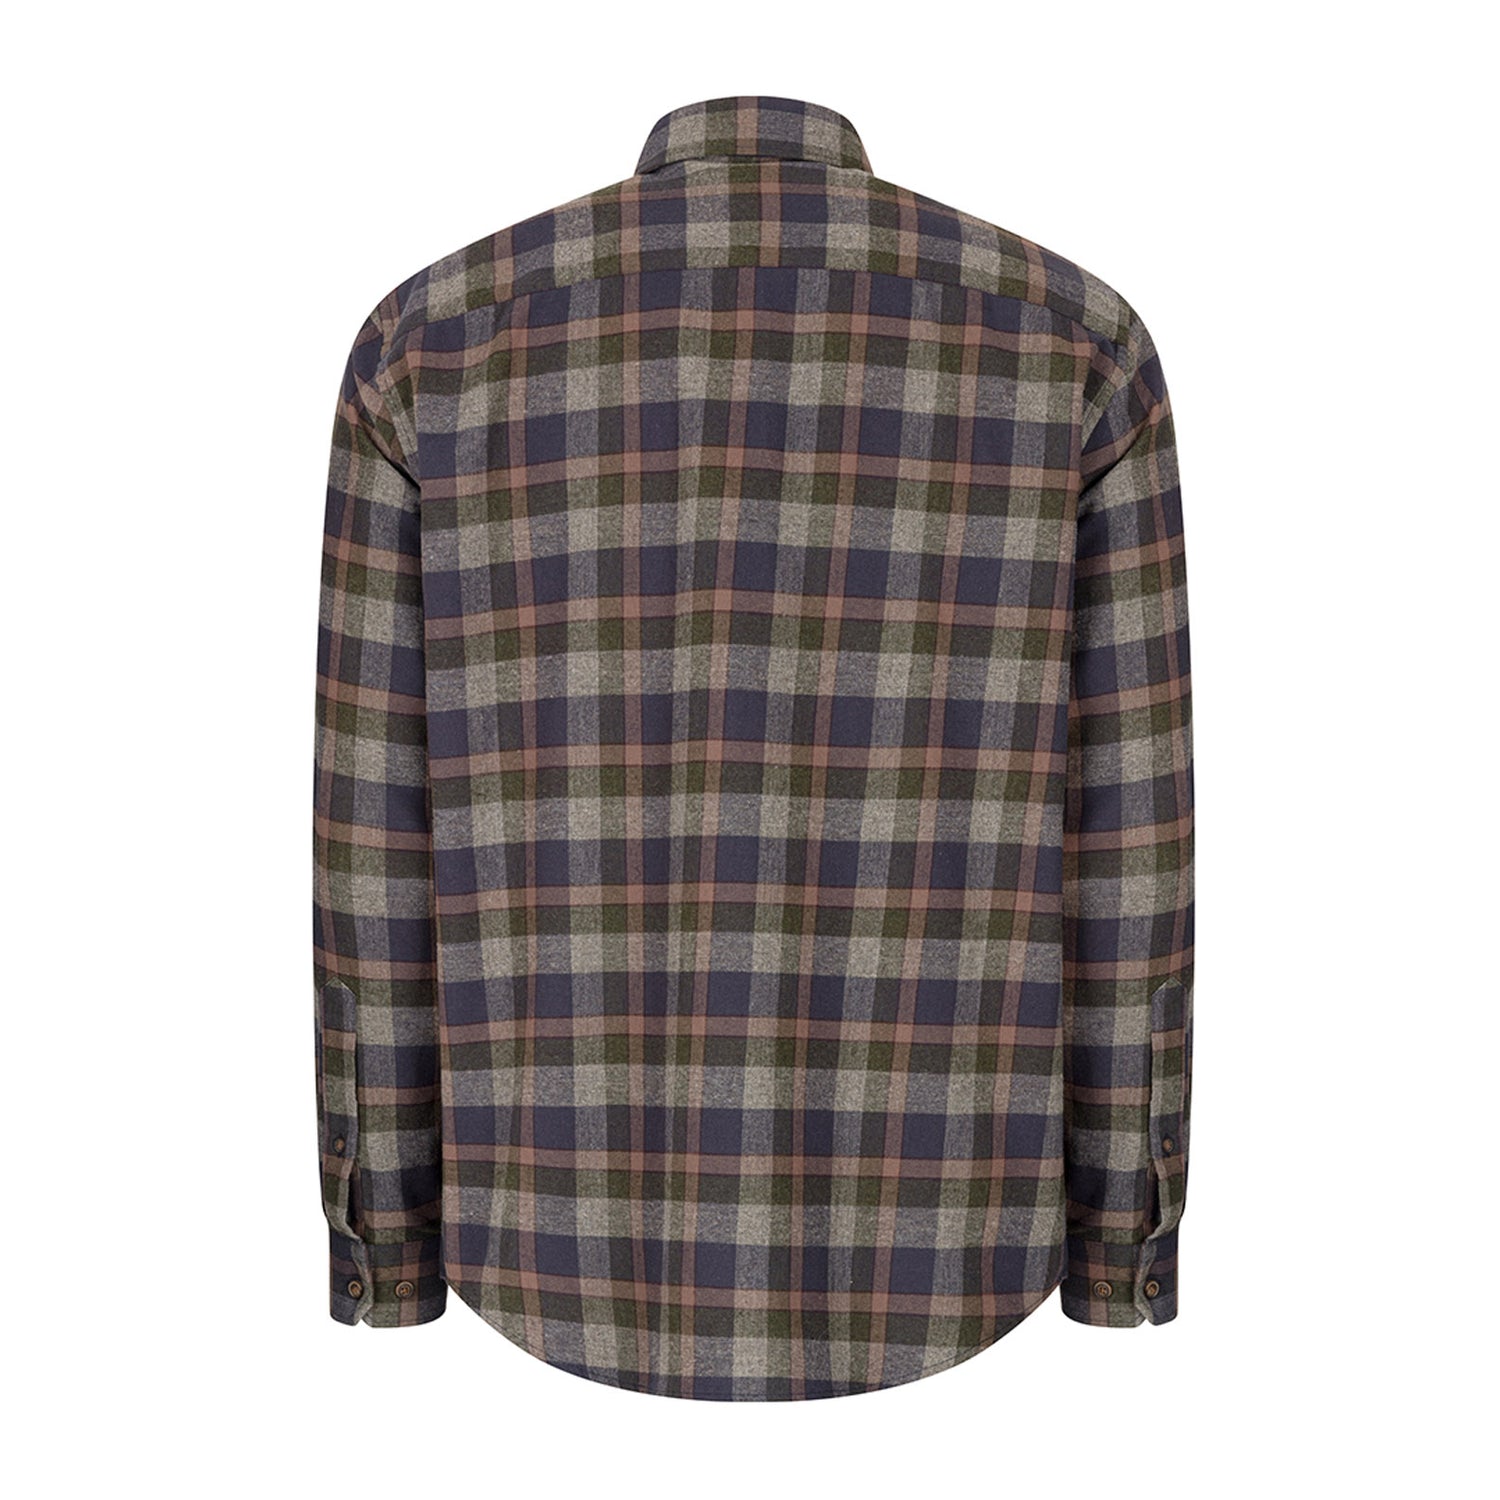 Hoggs of Fife Kirkwall Brushed Flannel Check Shirt